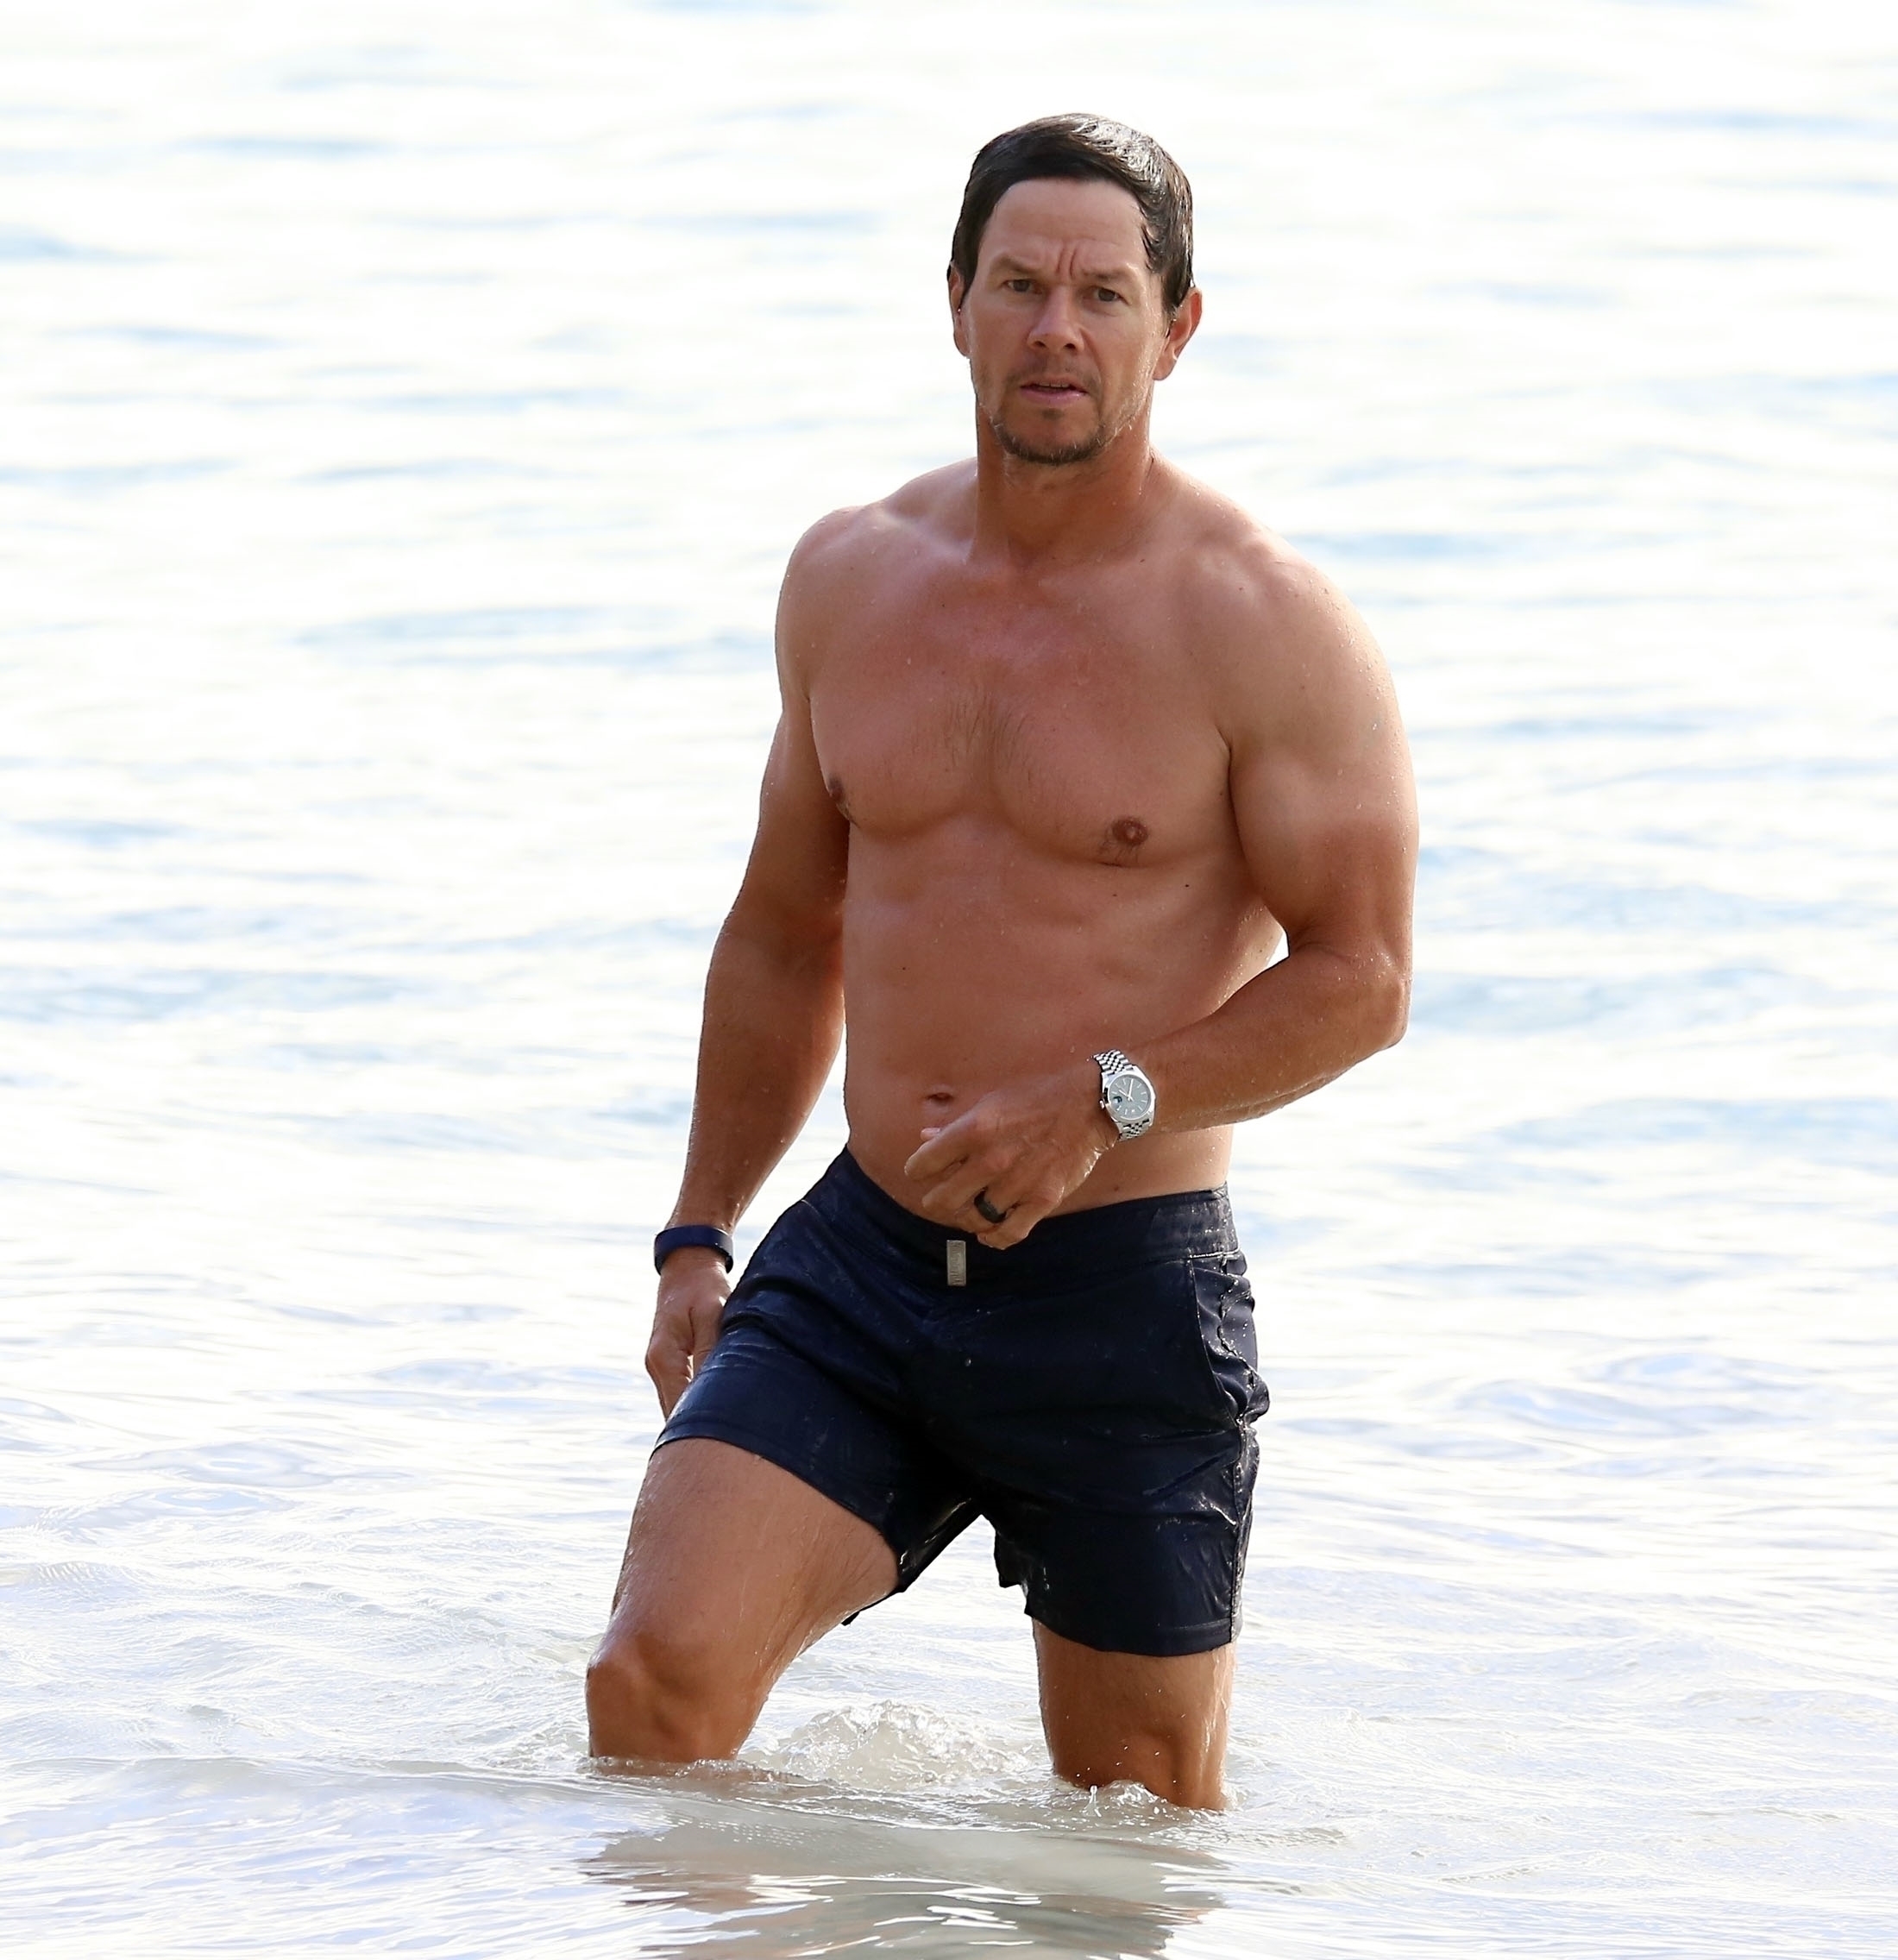 <p><a href="https://www.wonderwall.com/celebrity/profiles/overview/mark-wahlberg-926.article">Mark Wahlberg</a> went for a New Year's Day swim in the ocean in the parish of St. James in Barbados during a family holiday vacation.</p>